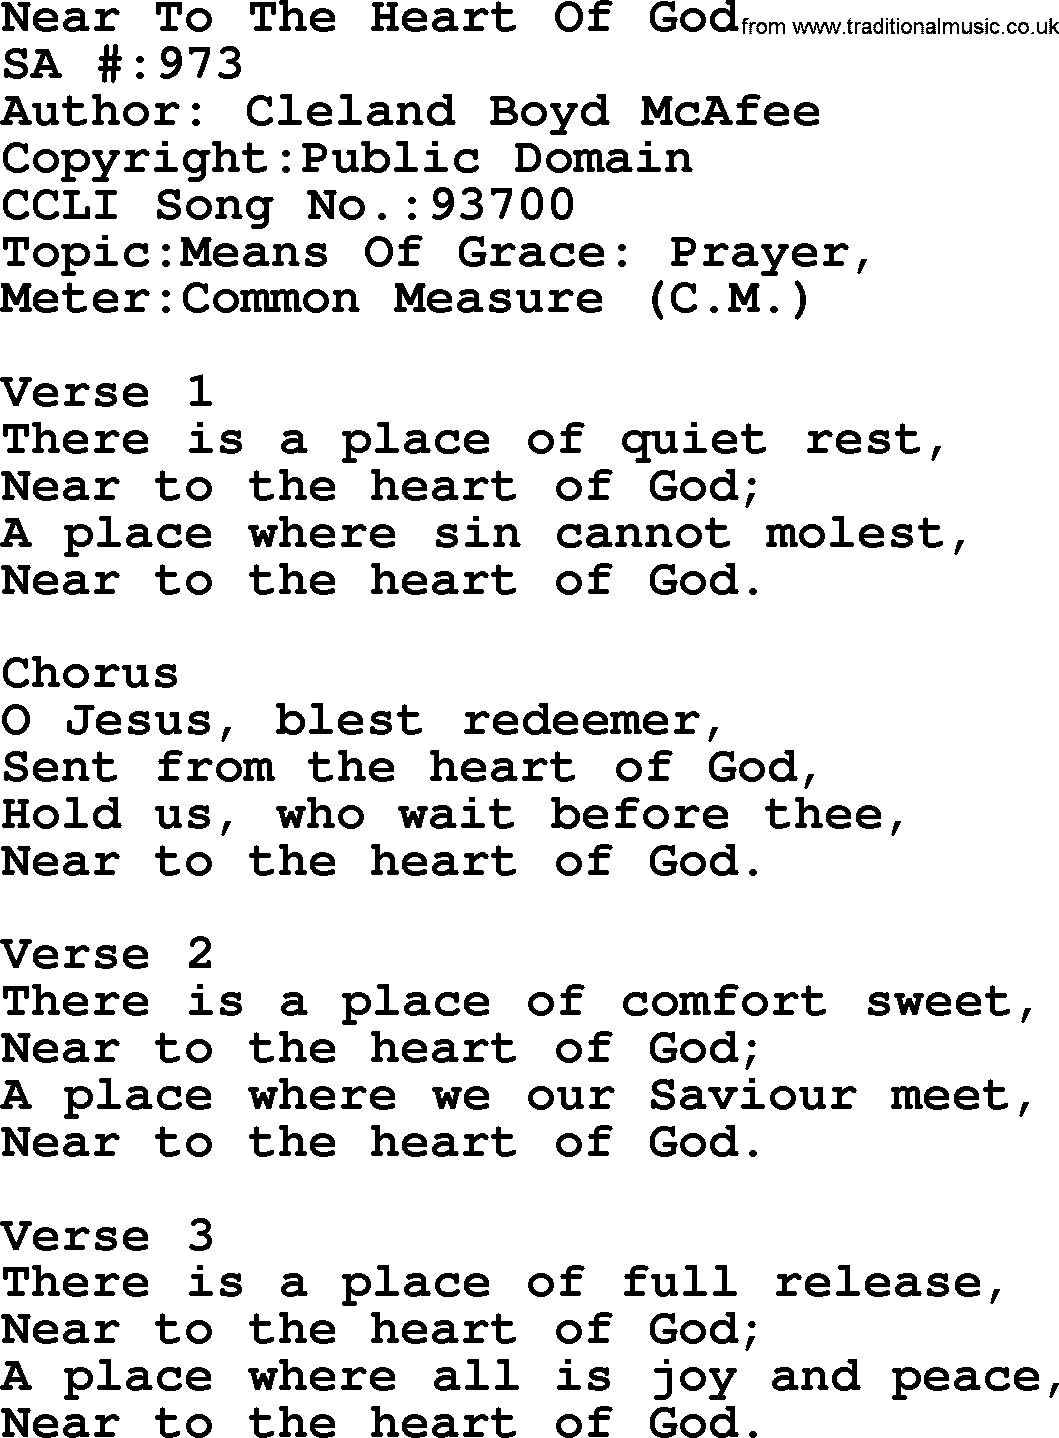 Salvation Army Hymnal, title: Near To The Heart Of God, with lyrics and PDF,